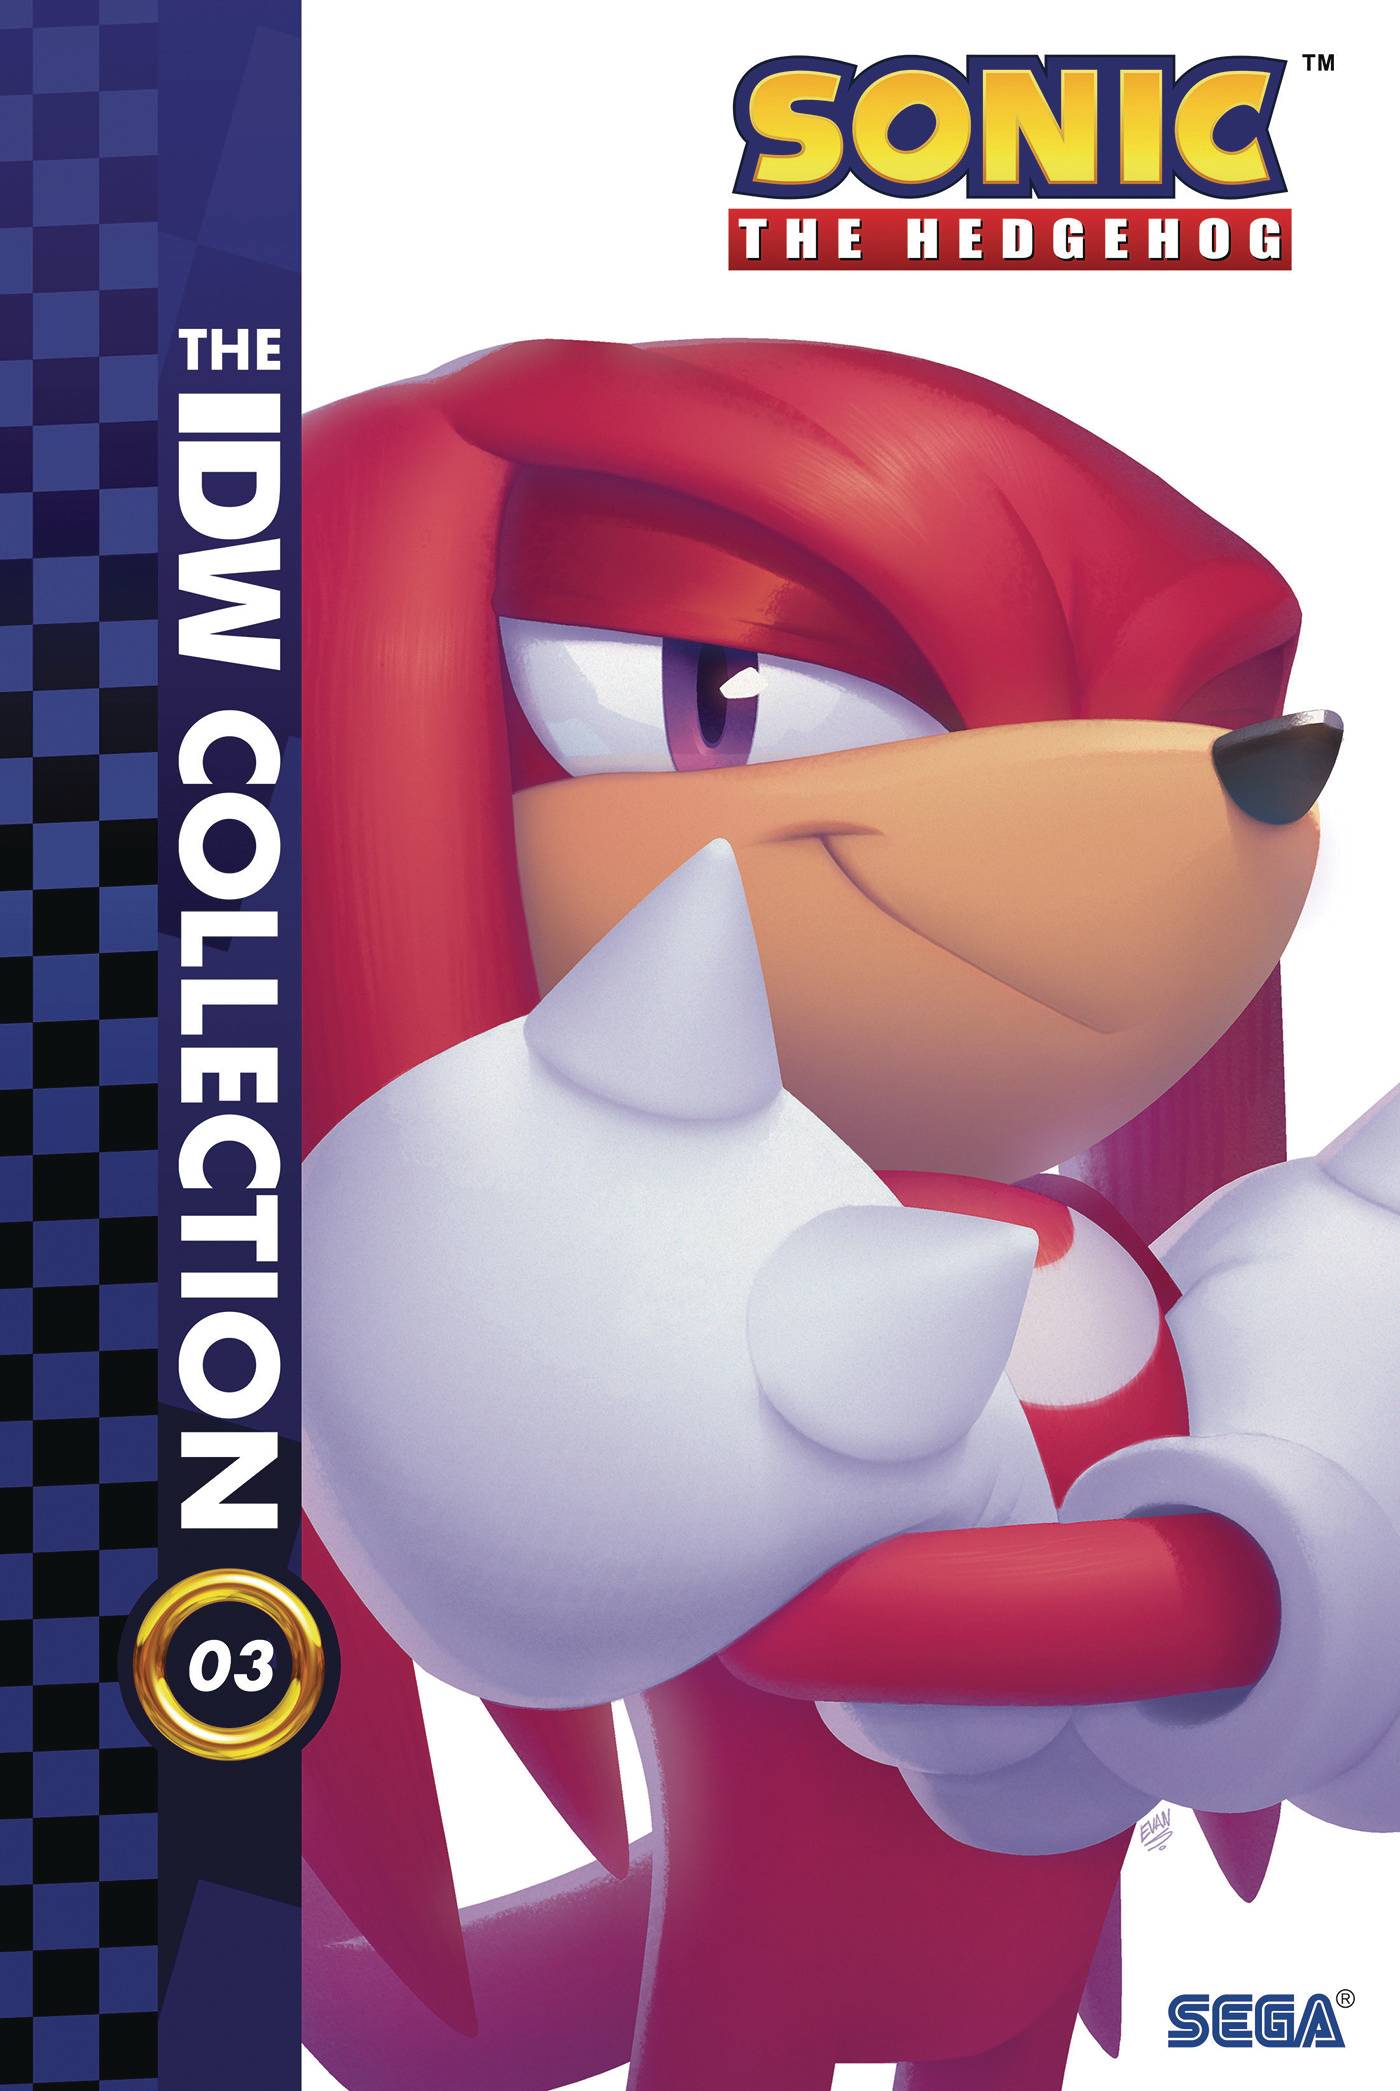 SONIC THE HEDGEHOG IDW COLLECTION HC VOL 03